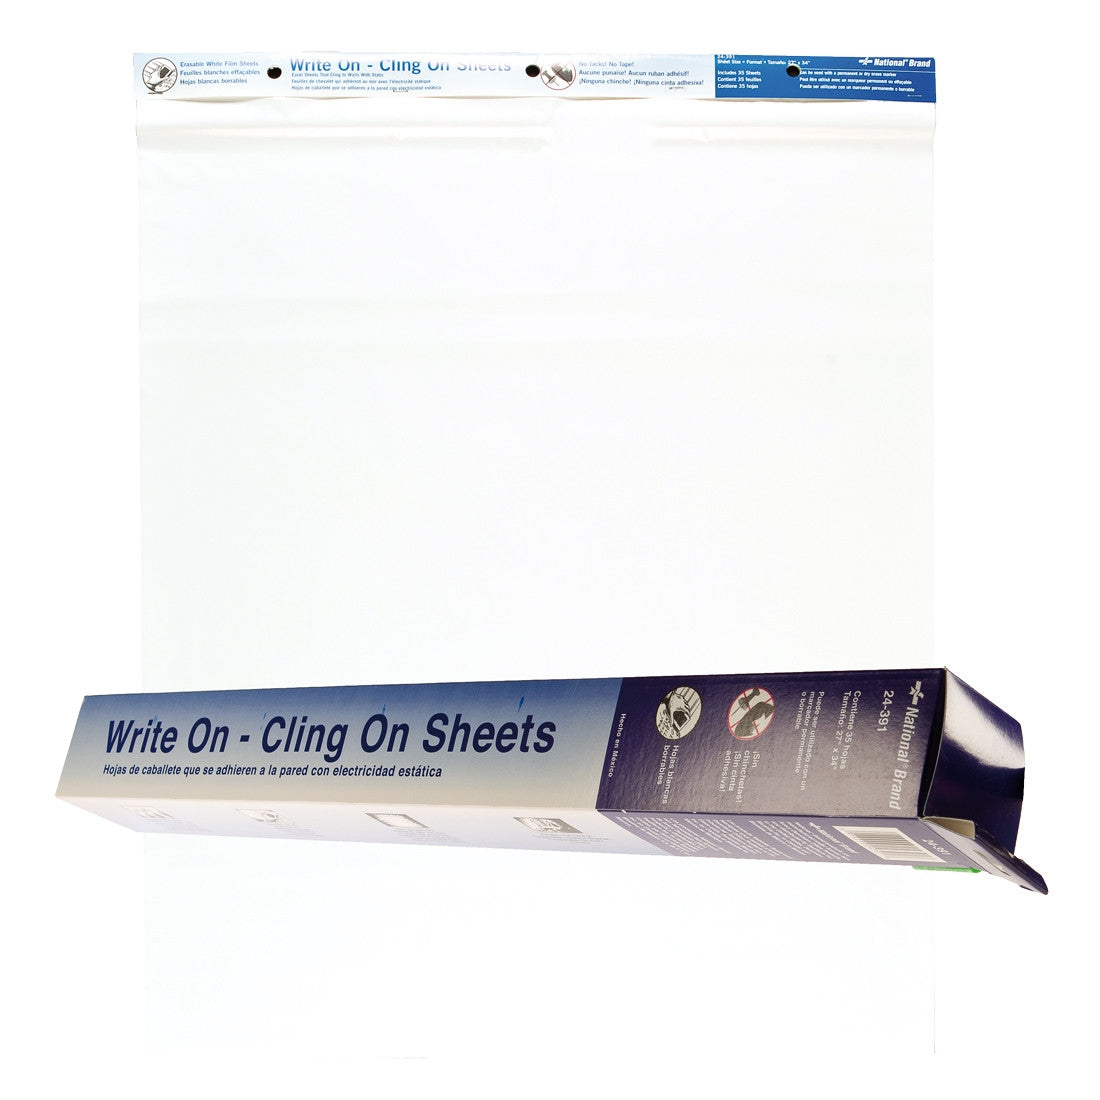 "Write on-Cling on" Sheets